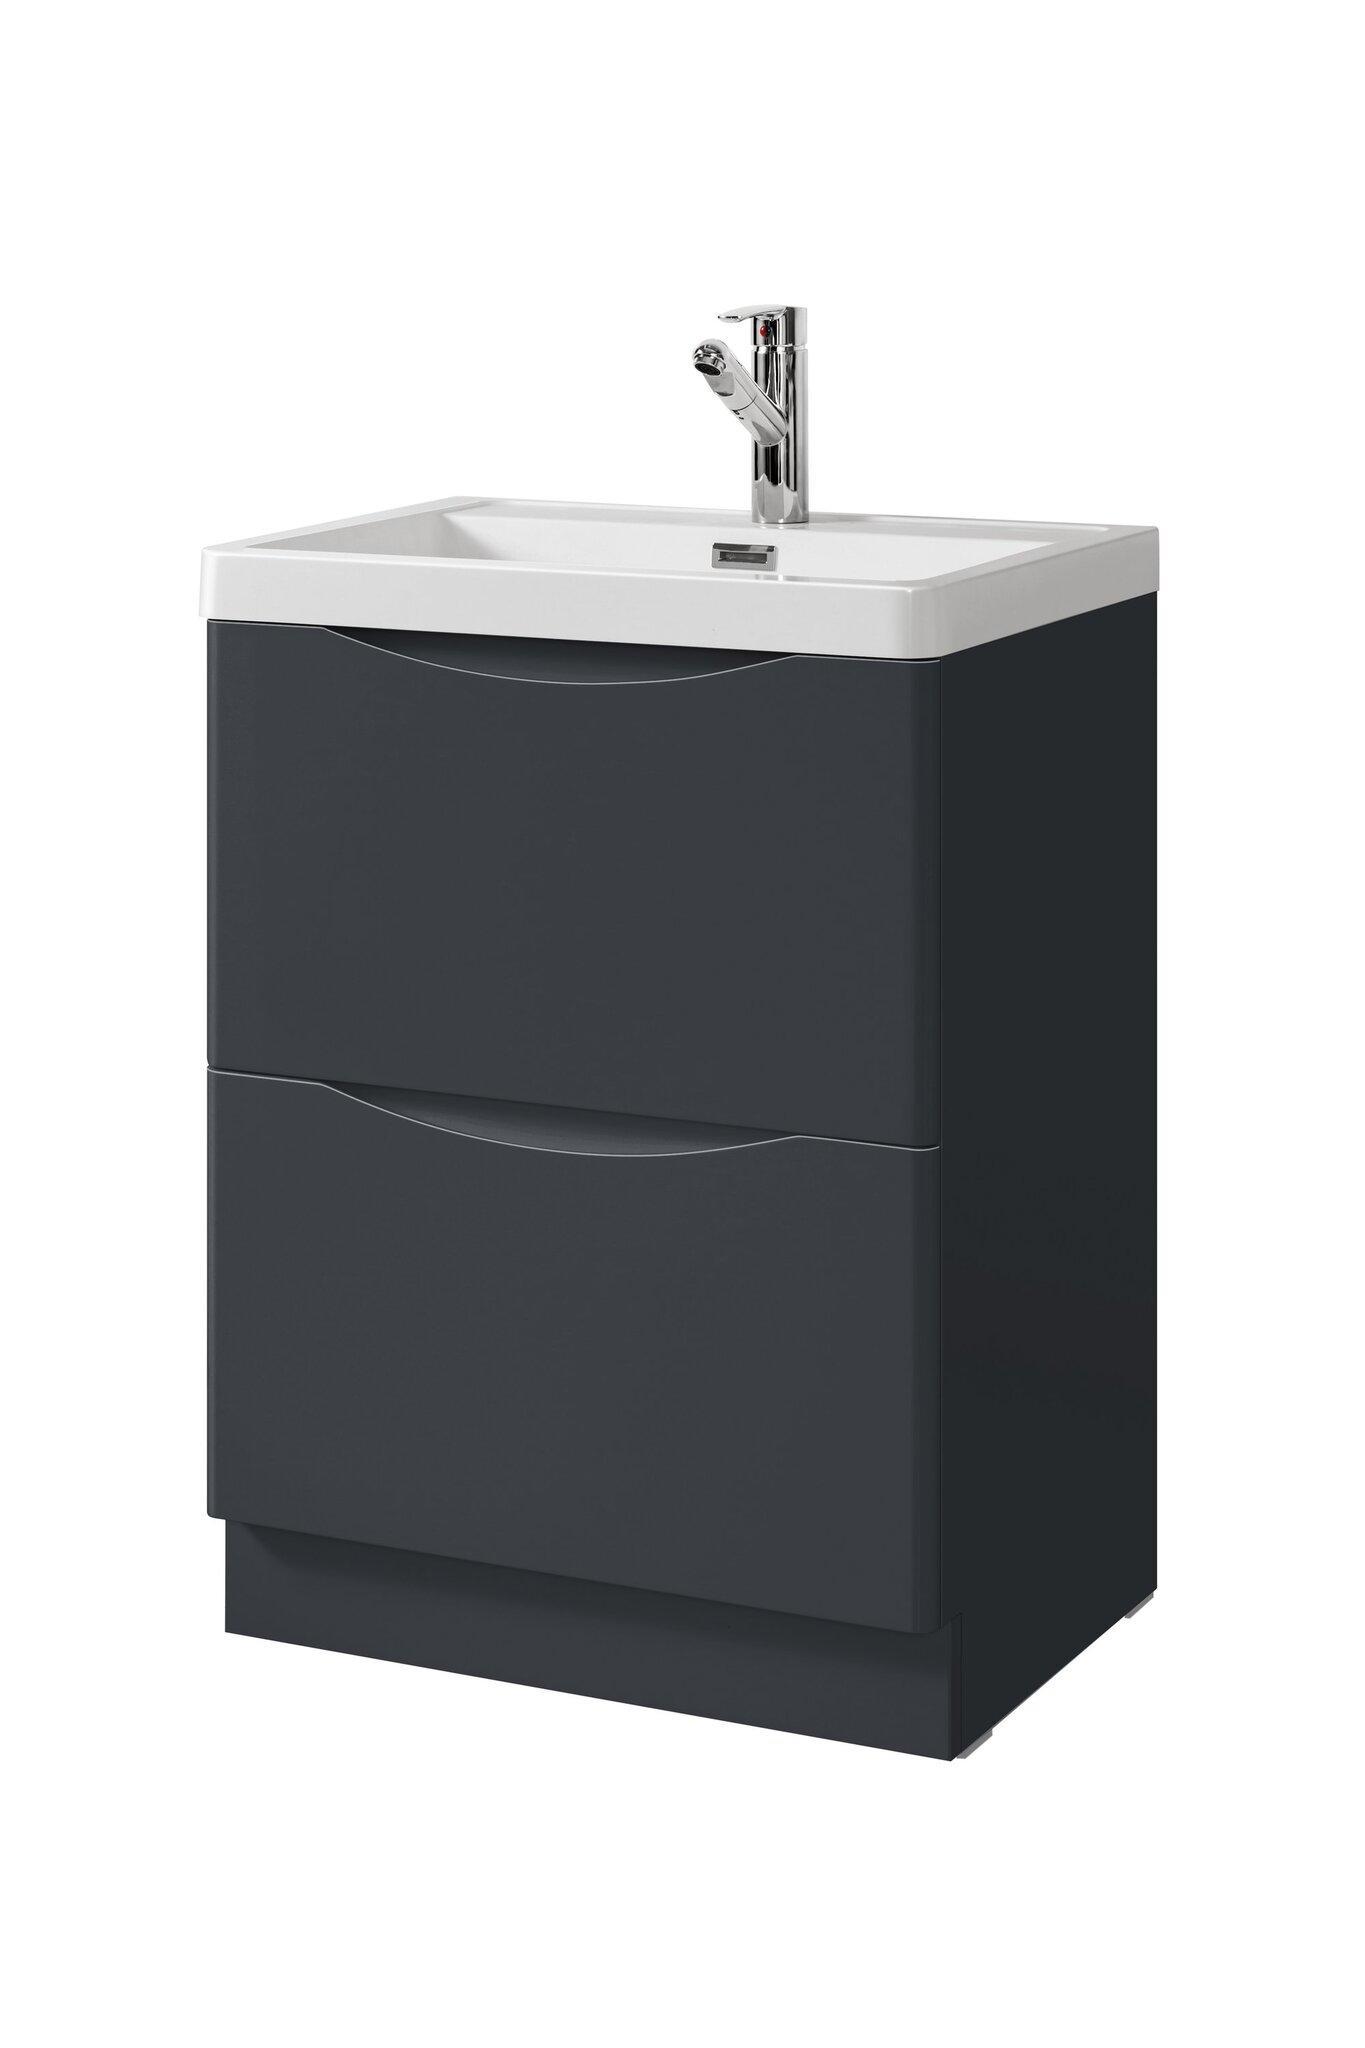 An image of Naples Smile 600Mm Floor Standing Vanity Unit & Basin Shadow Grey Two Drawer